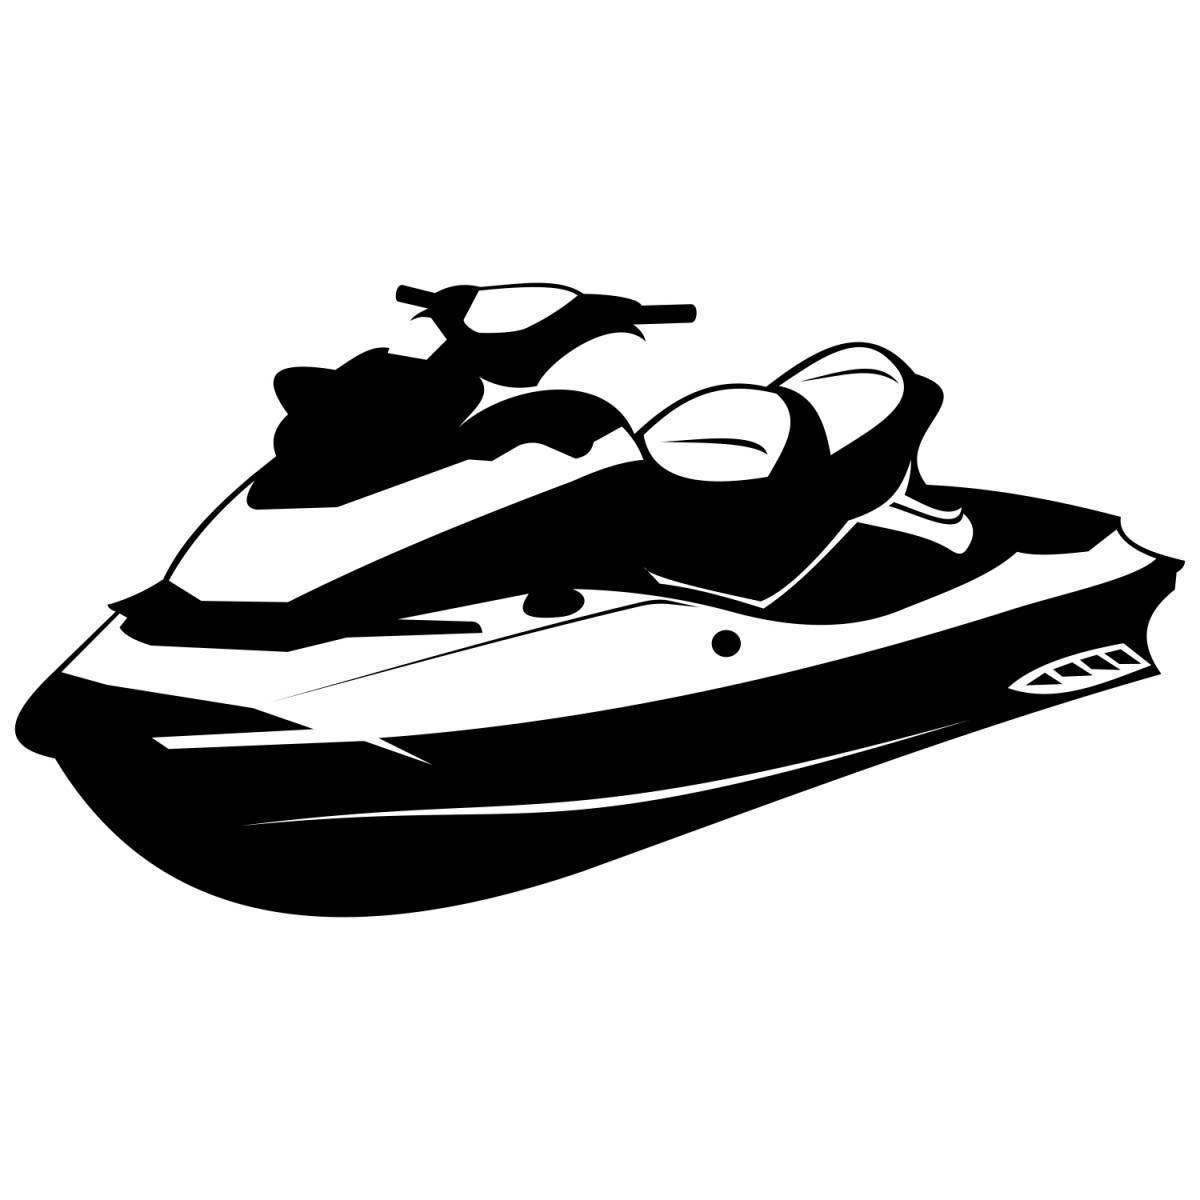 Awesome jet ski coloring page